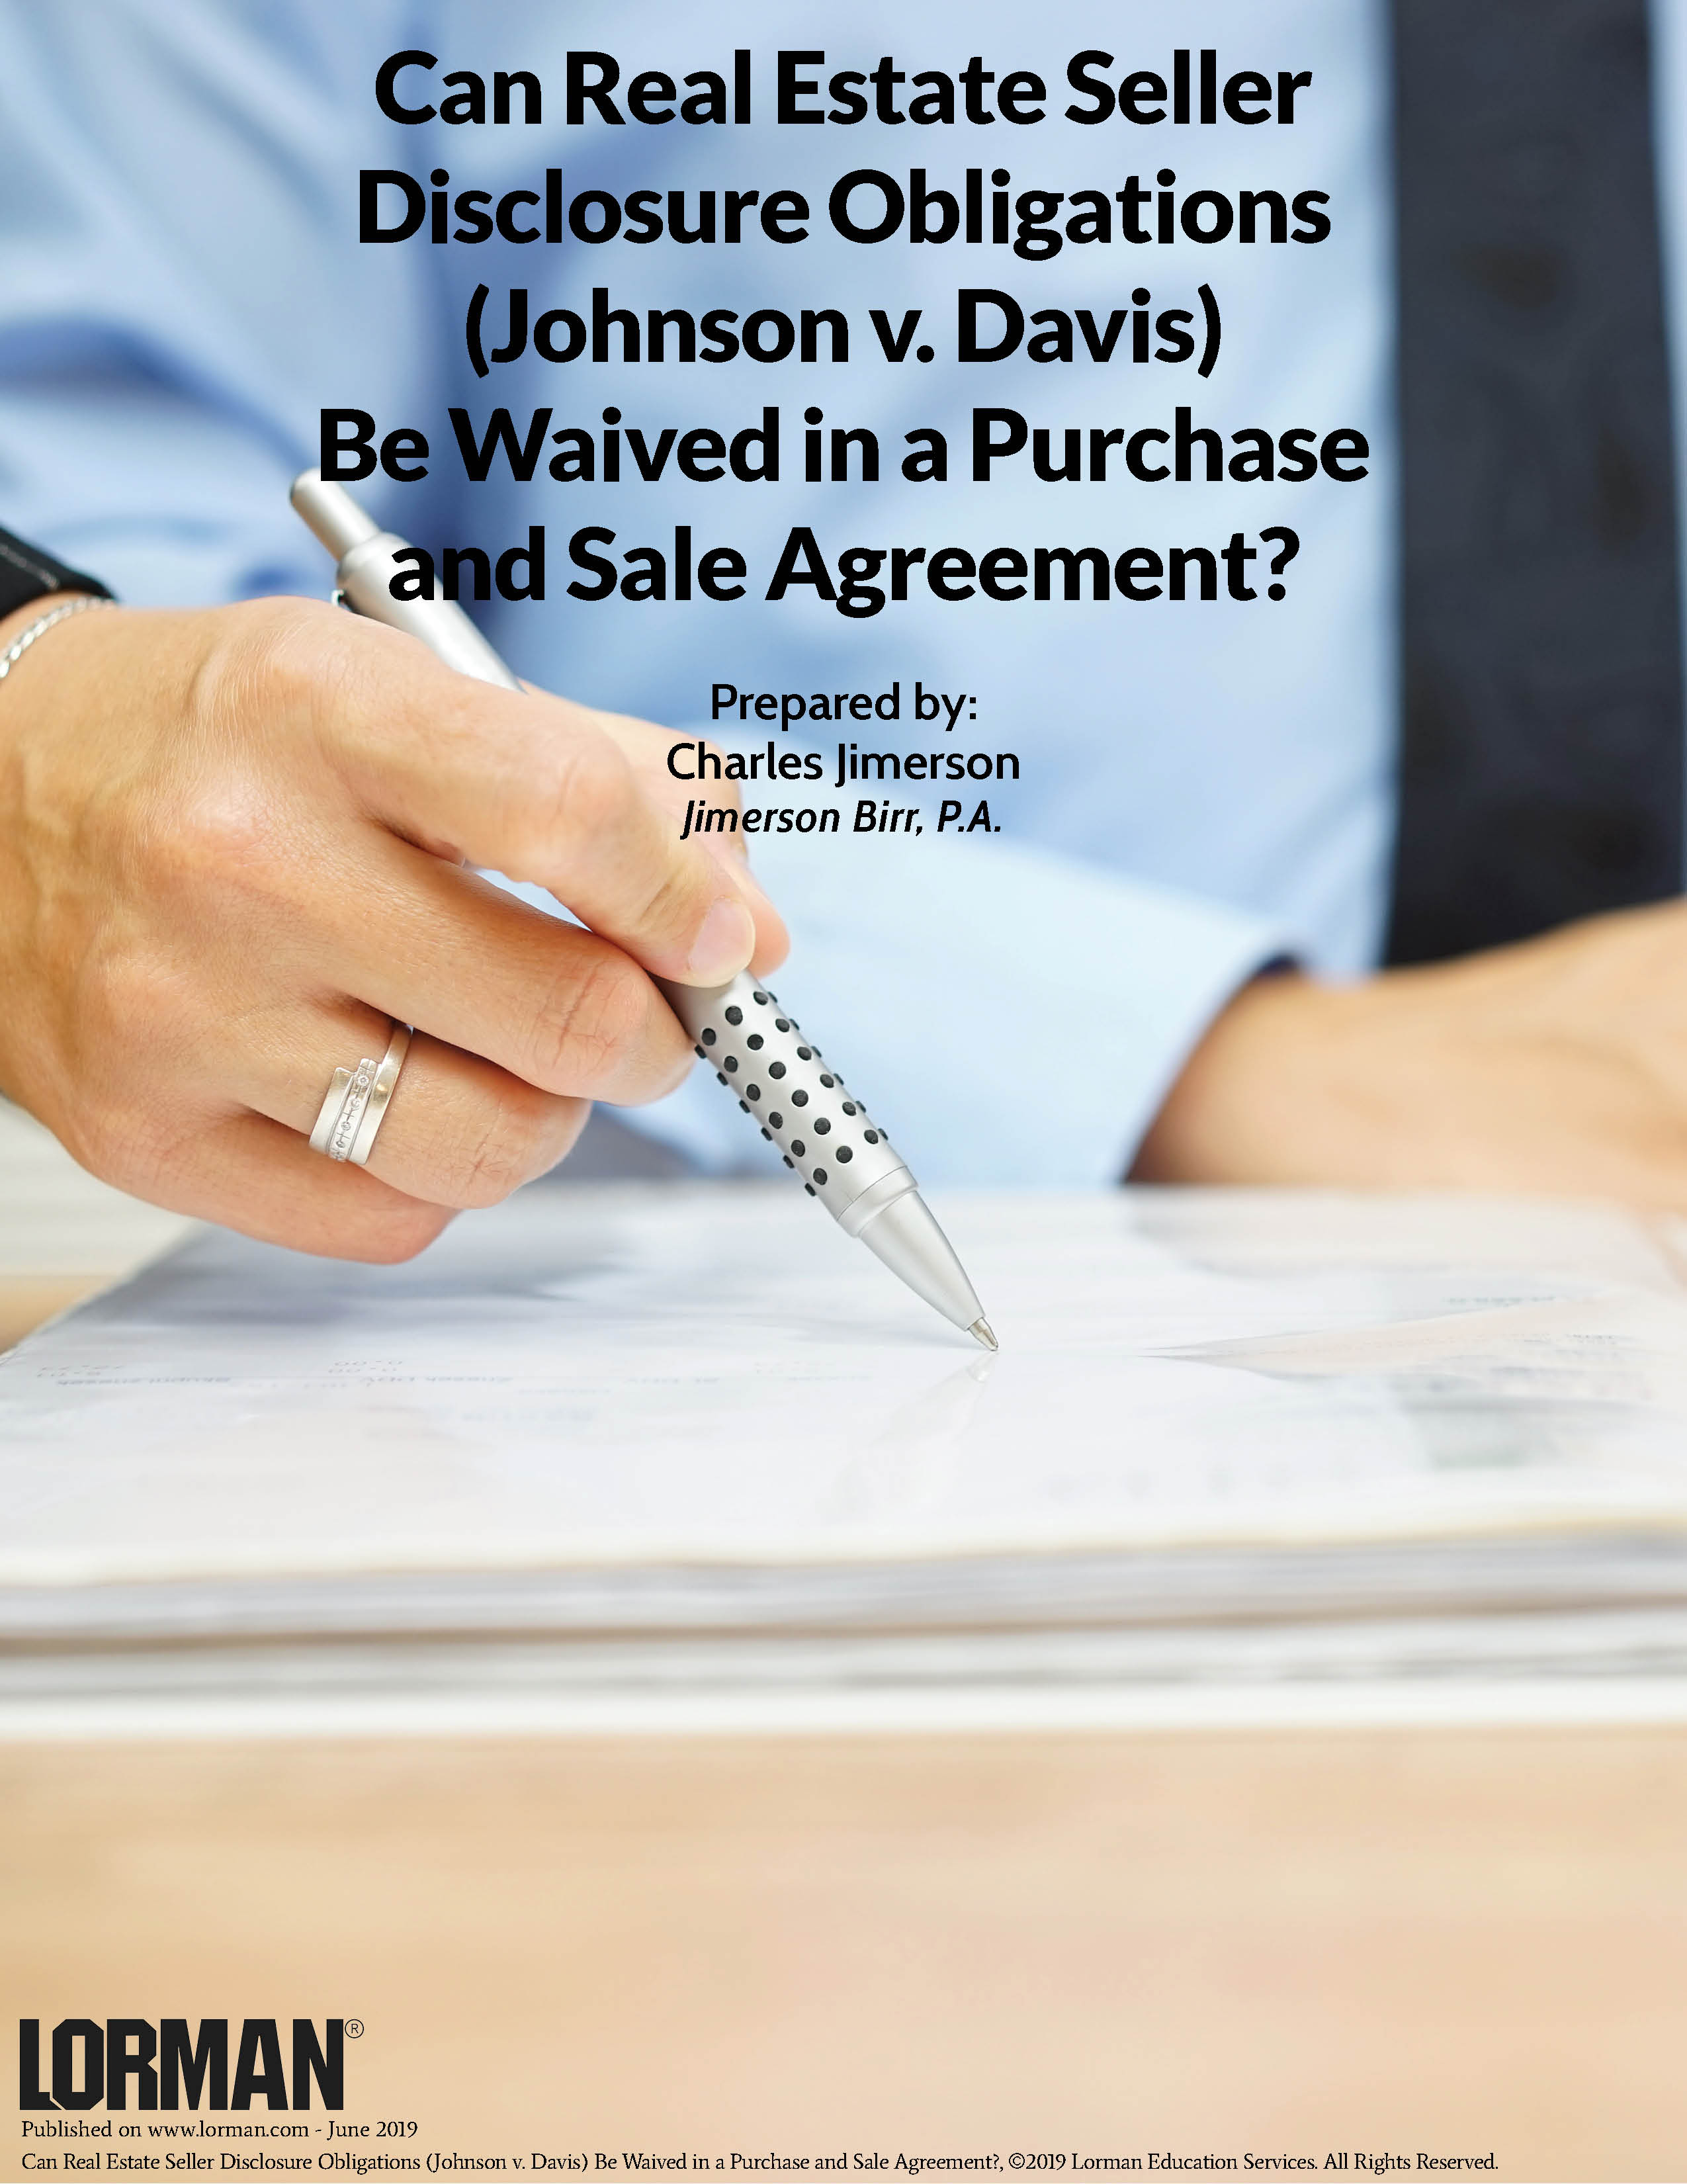 Can Real Estate Seller Disclosure Obligations Be Waived in a Purchase and Sale Agreement